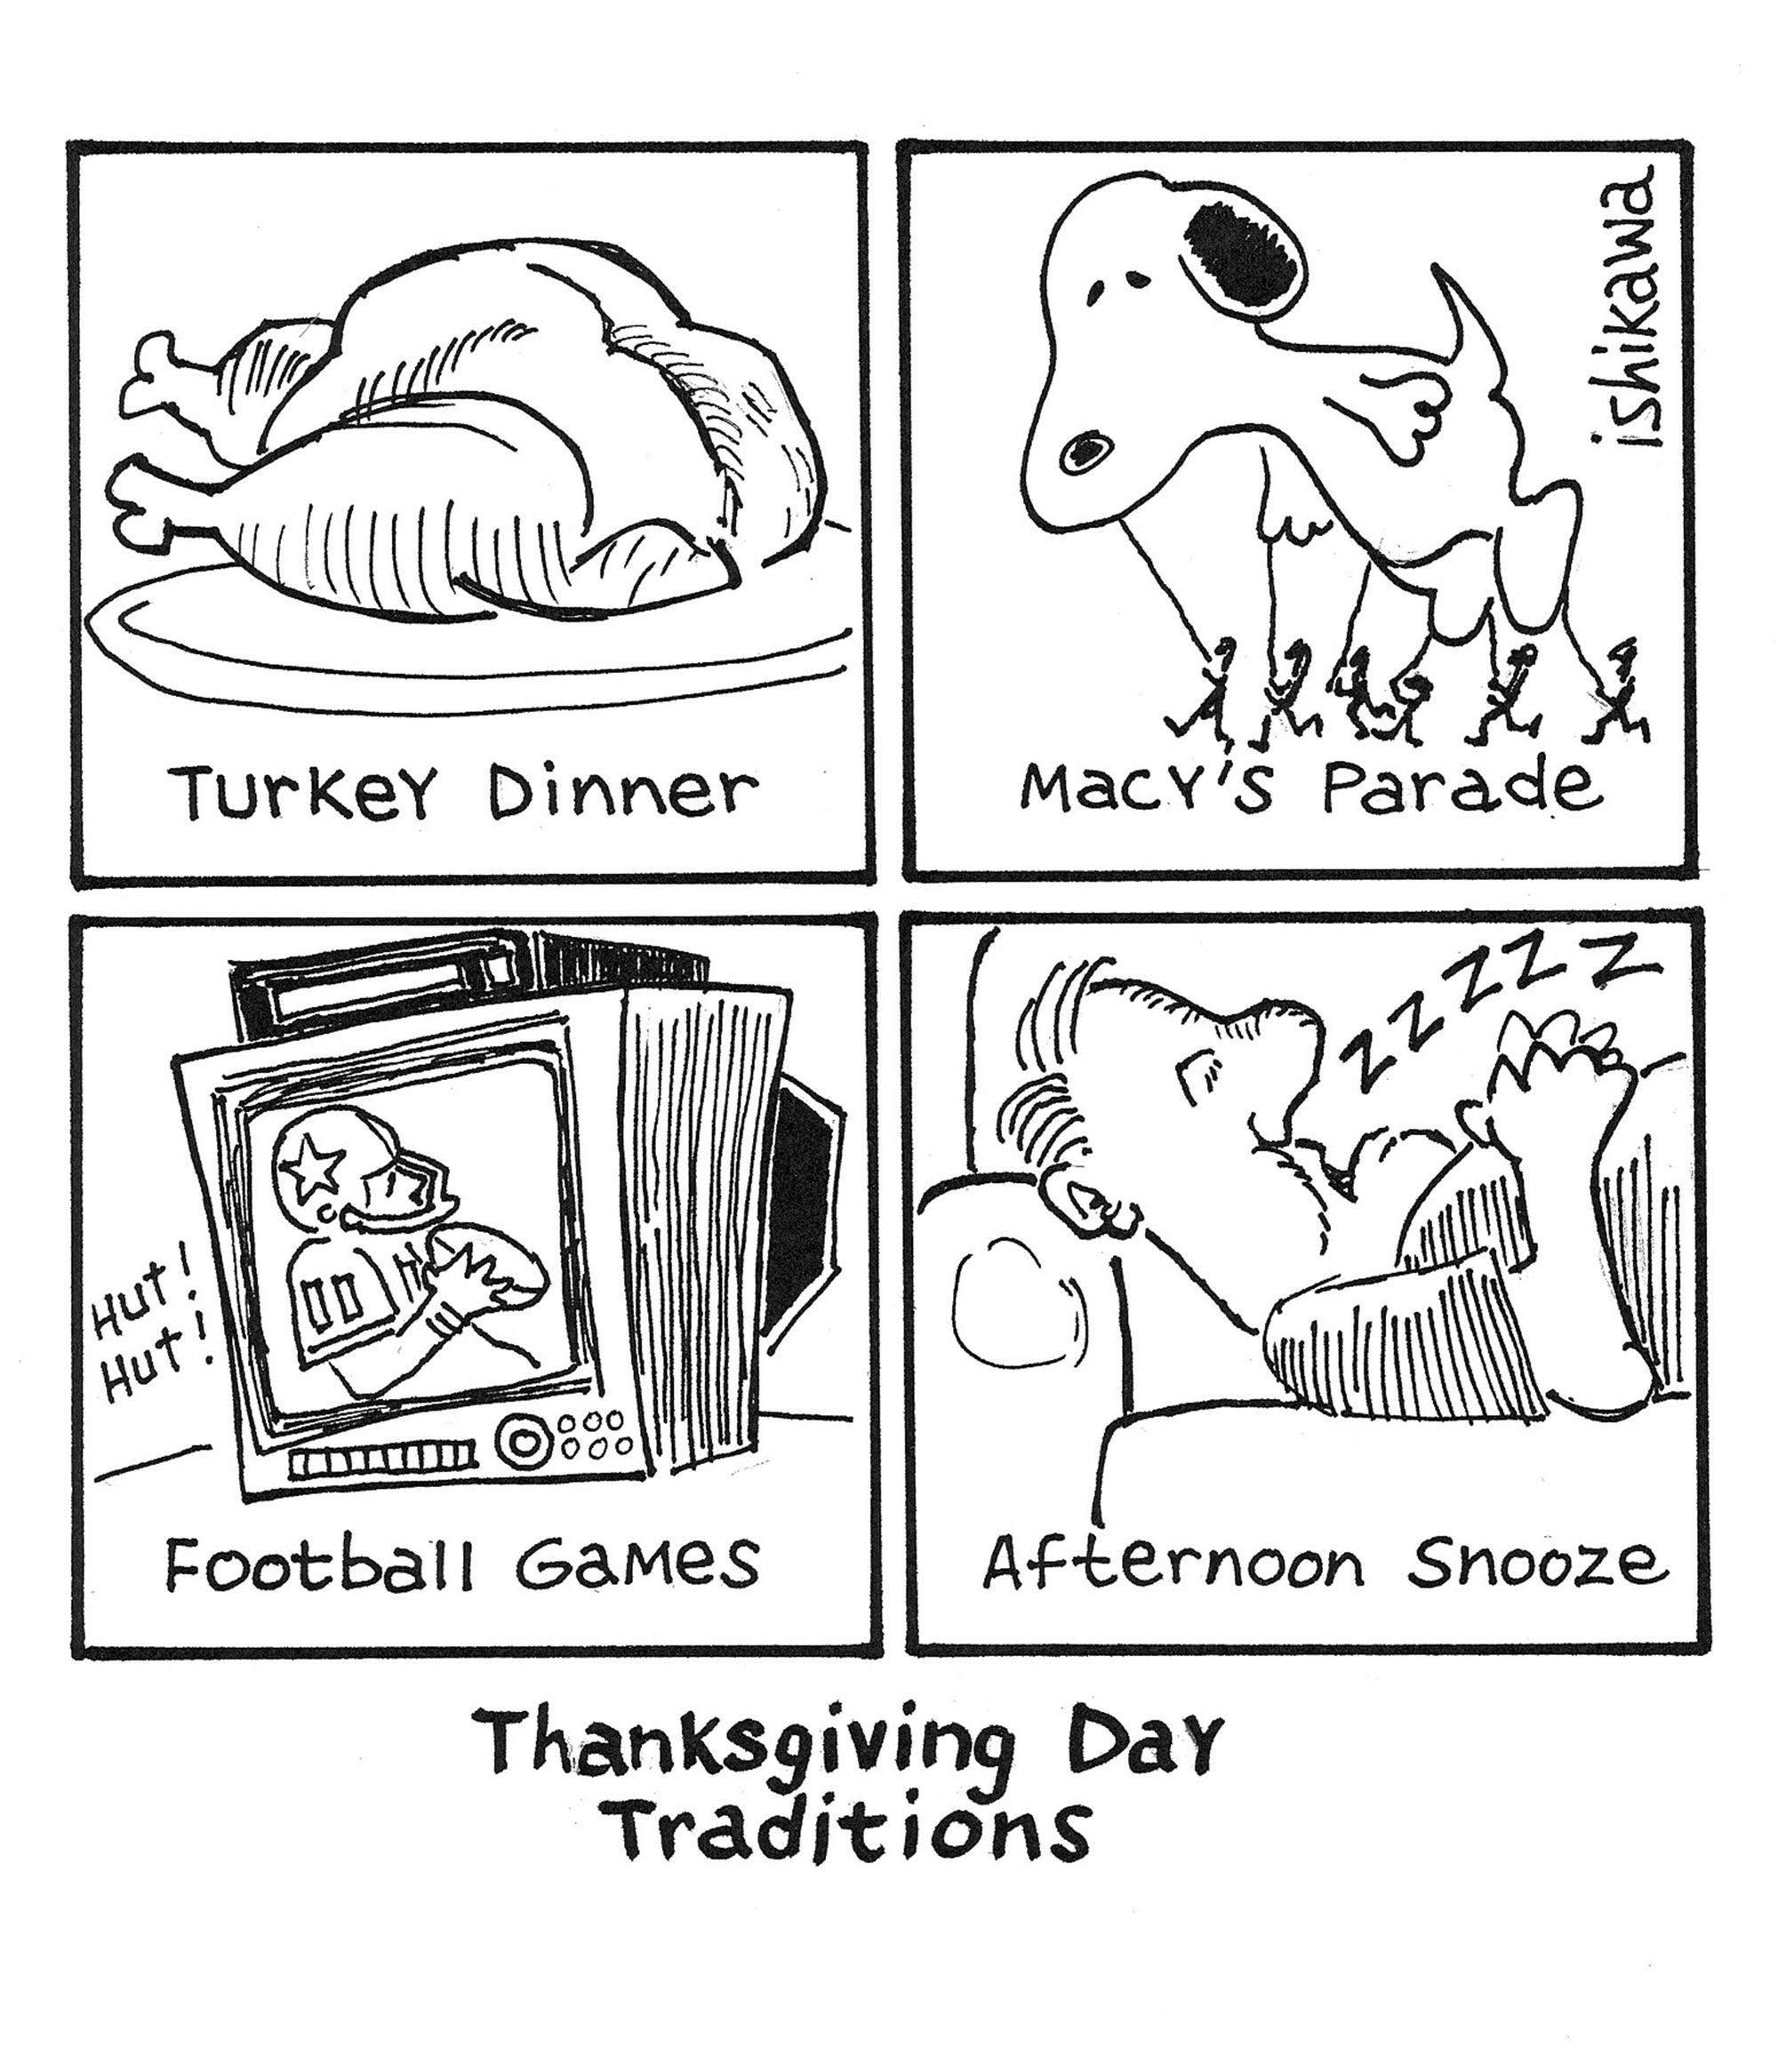 Thanksgiving Day Traditions